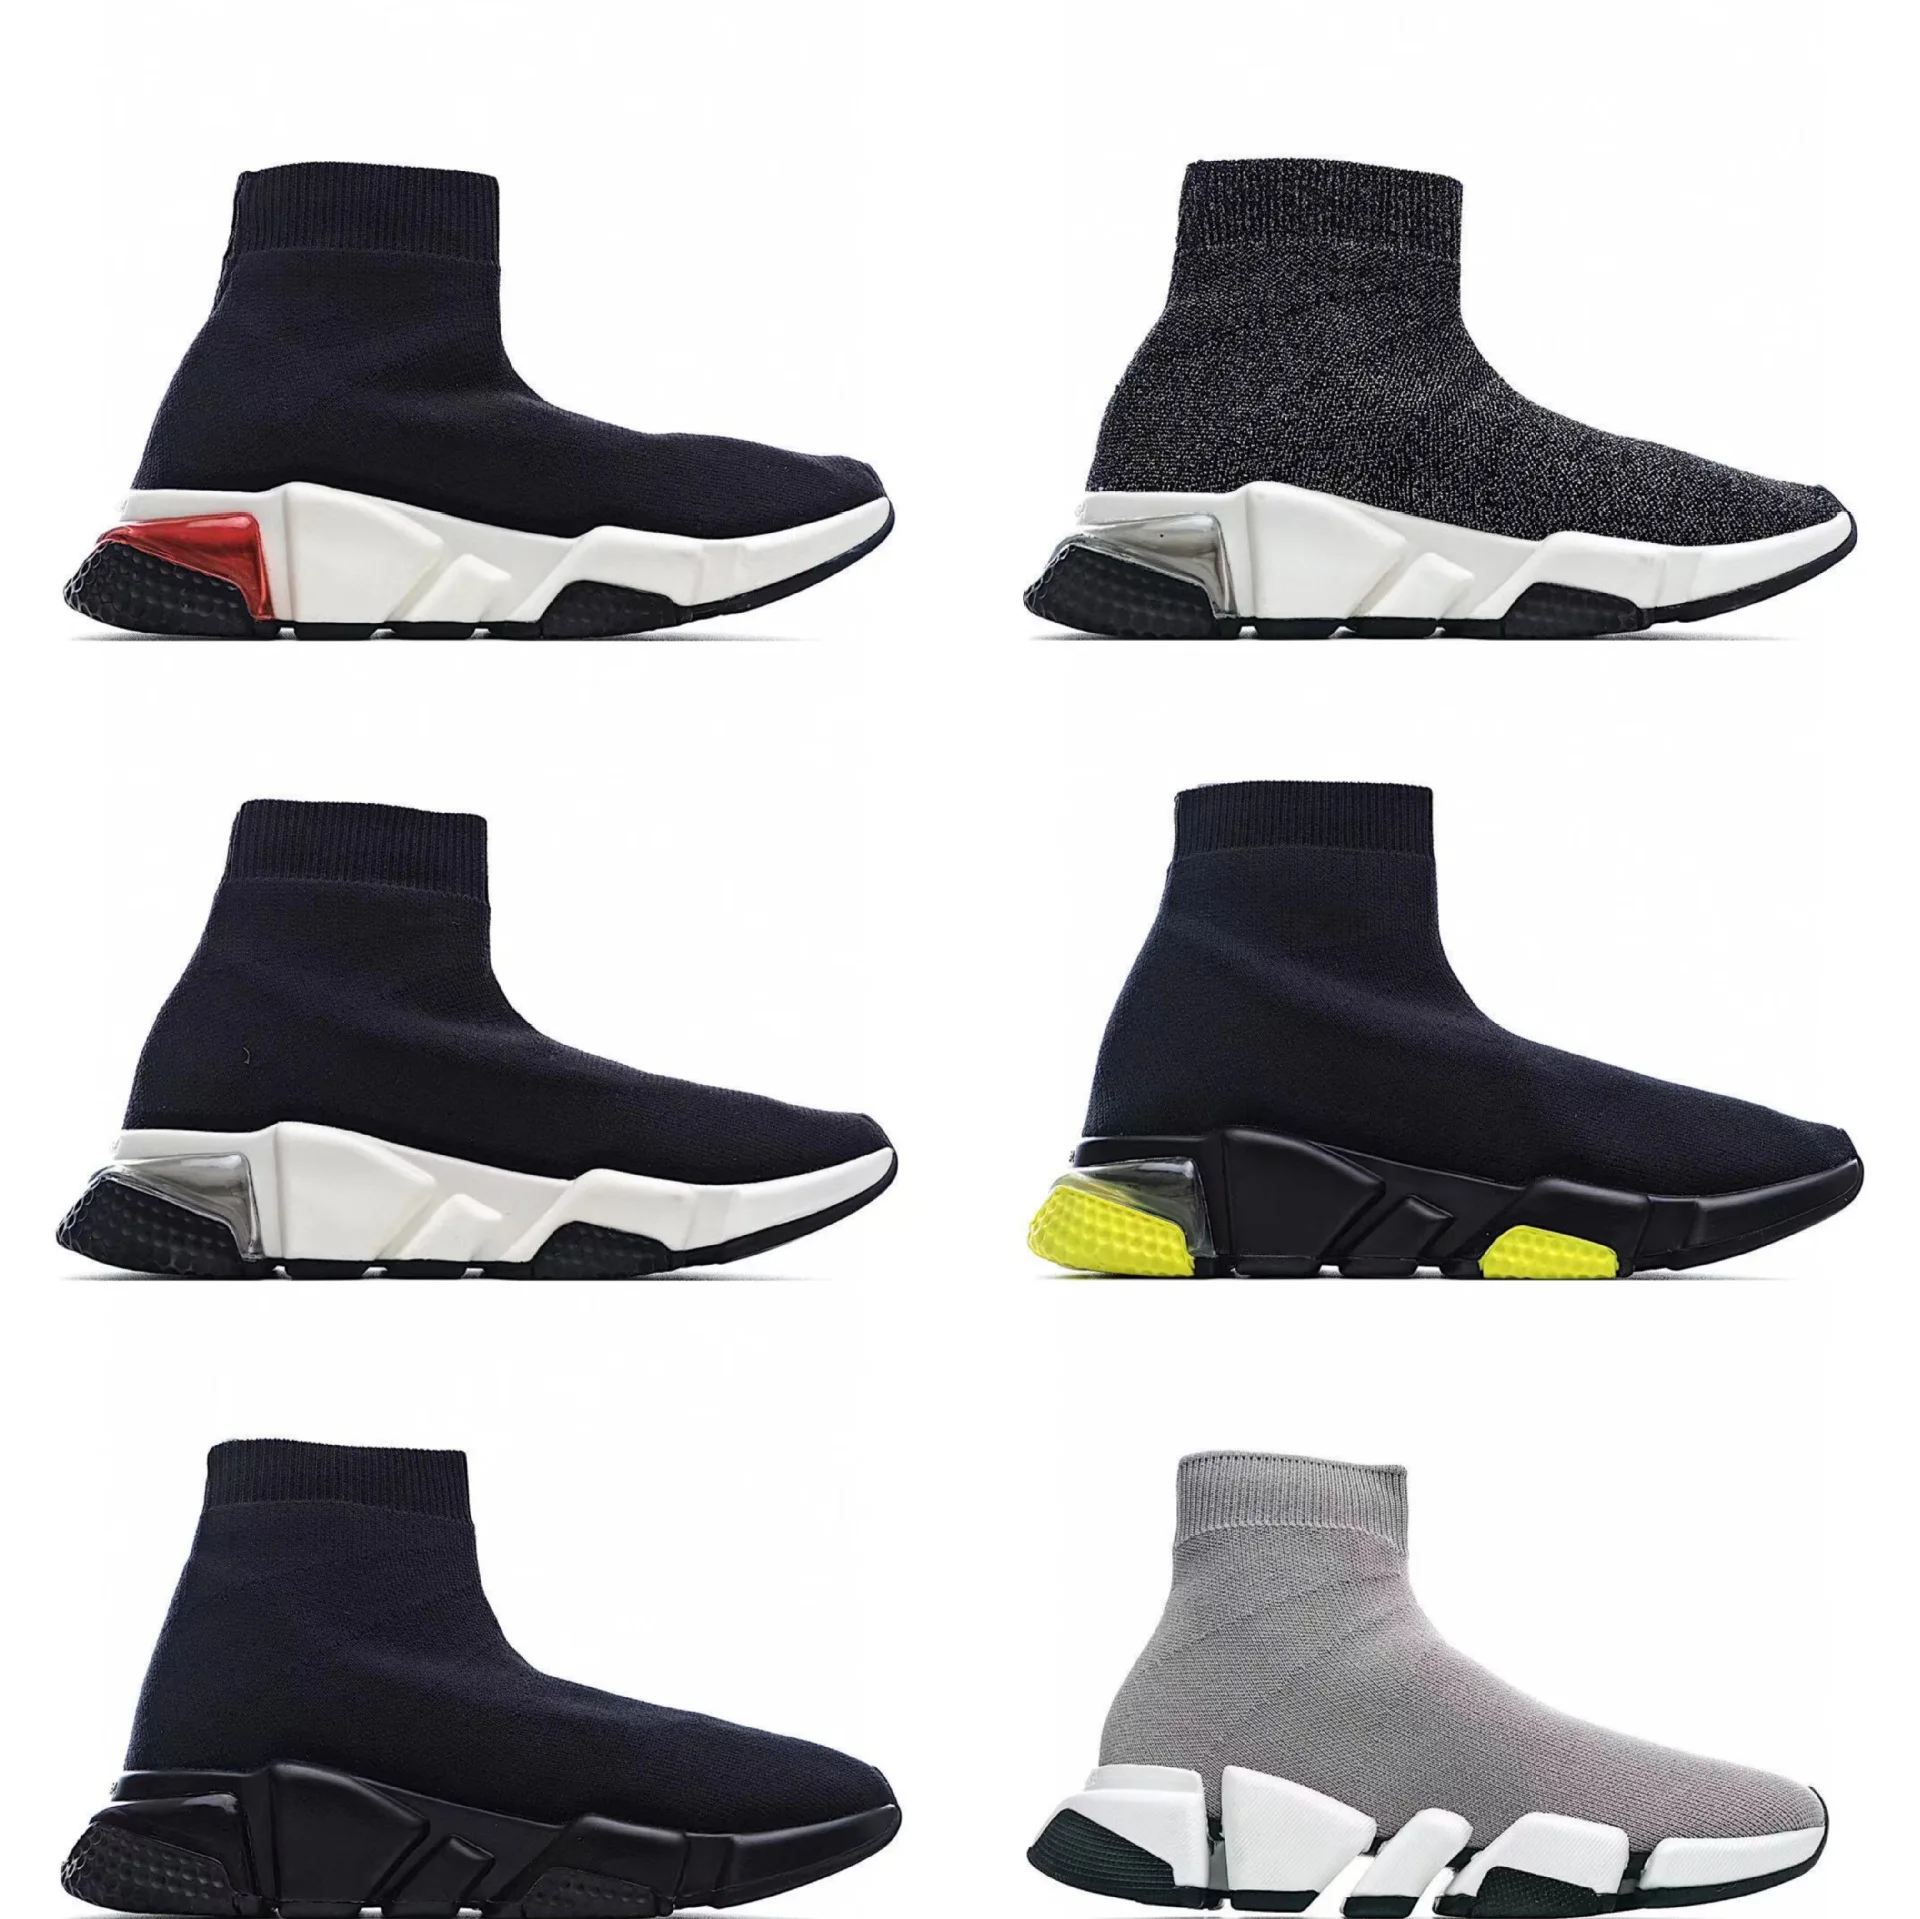 

Wholesale High Quality Fashionable Best-selling Brand Trainers Men Women Casual Sock Shoes, As picture and also can make as your request